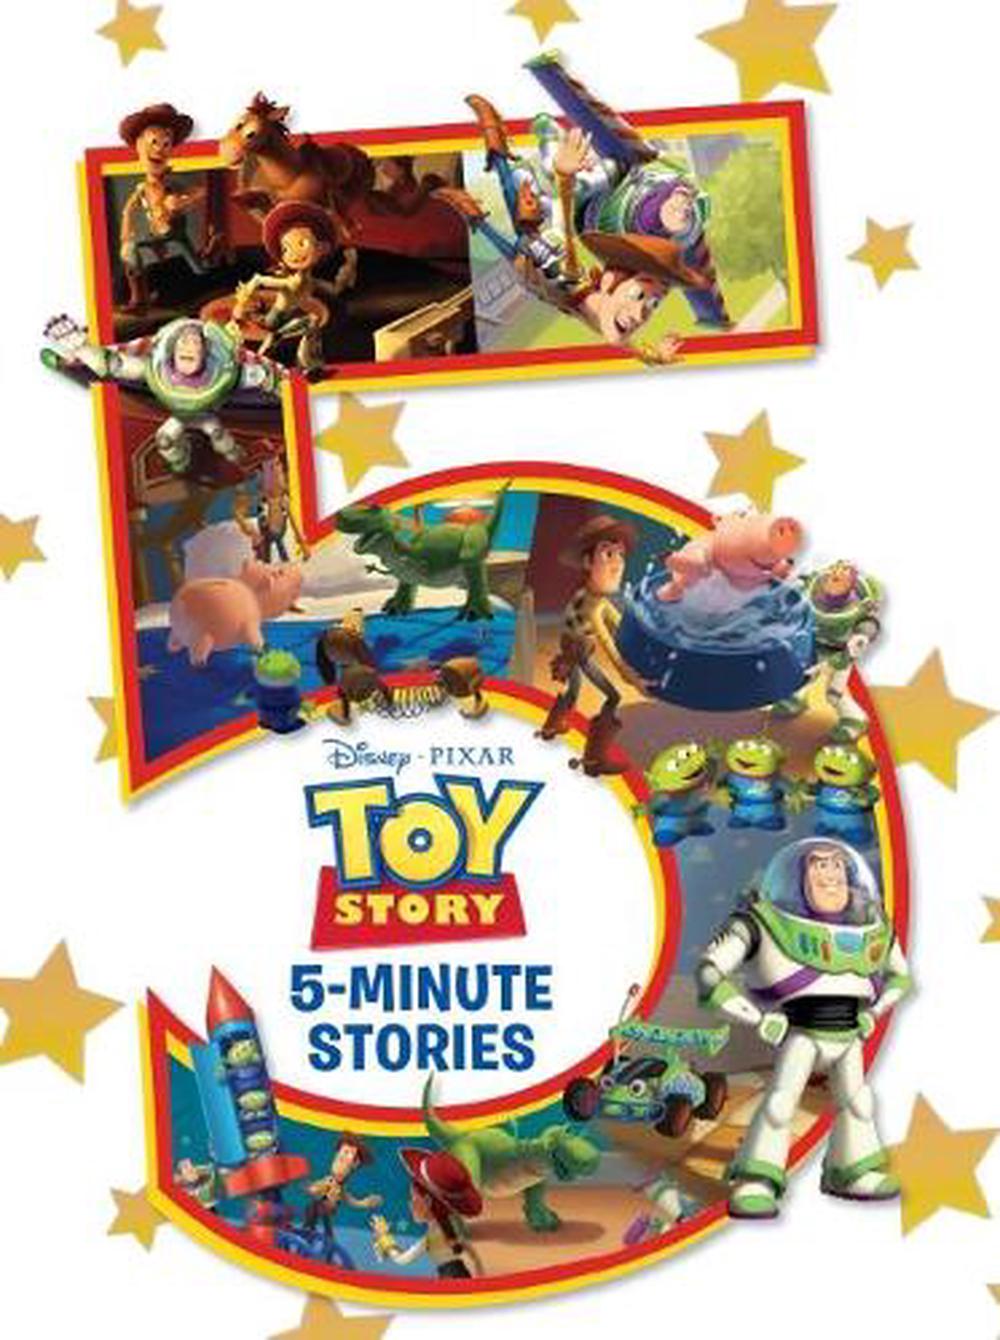 Disney Pixar Toy Story 5 Minute Stories Hardcover Book Free Shipping Ebay 